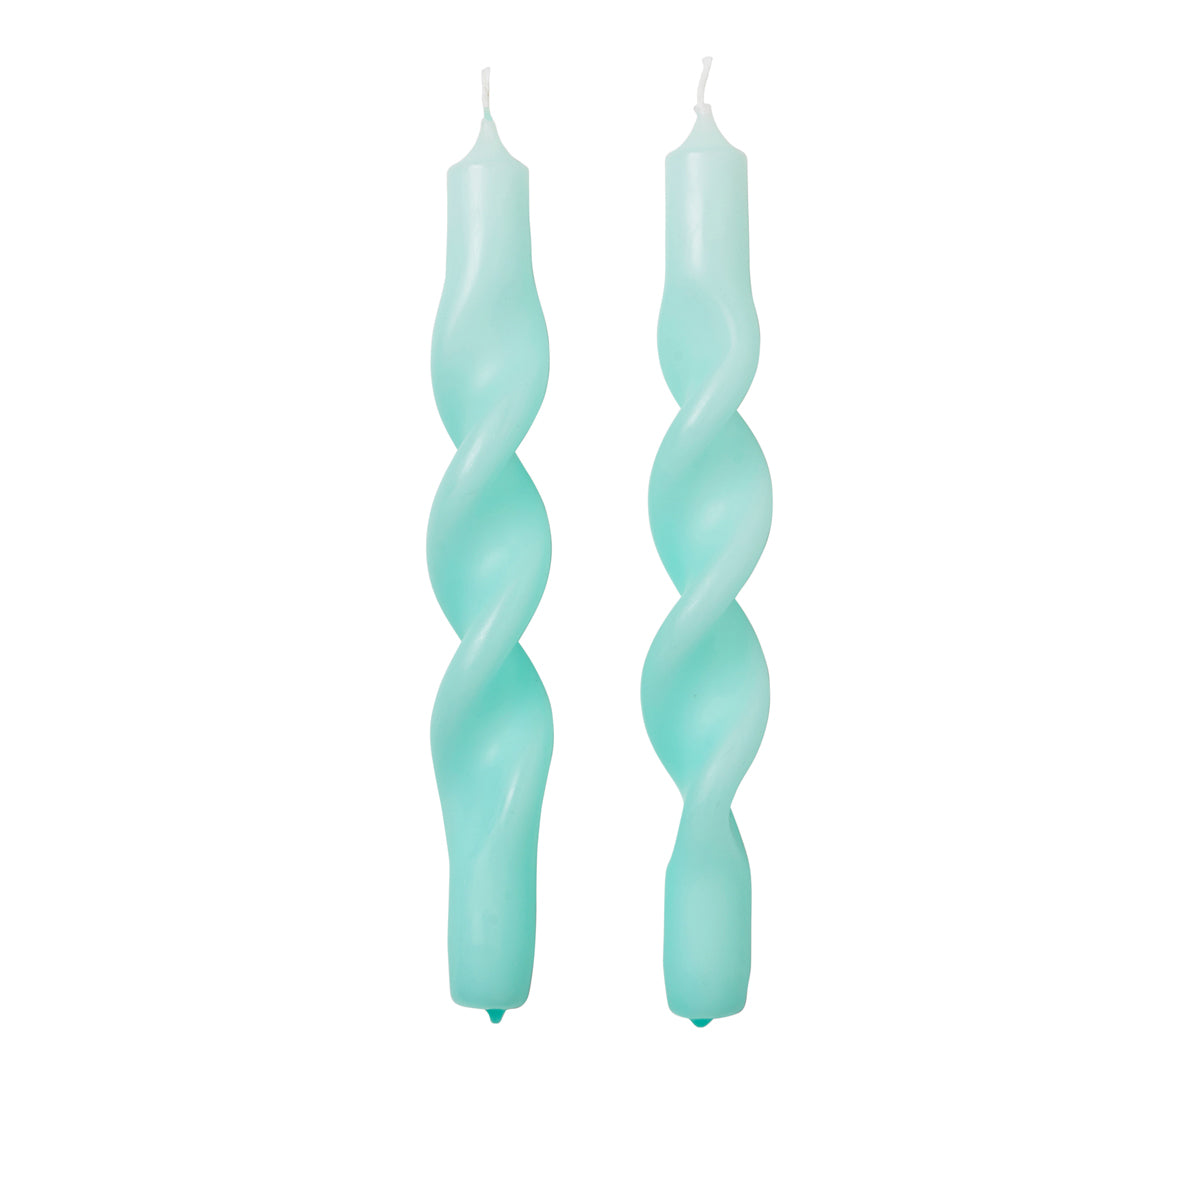 Twisted Candles Twist Mint Green